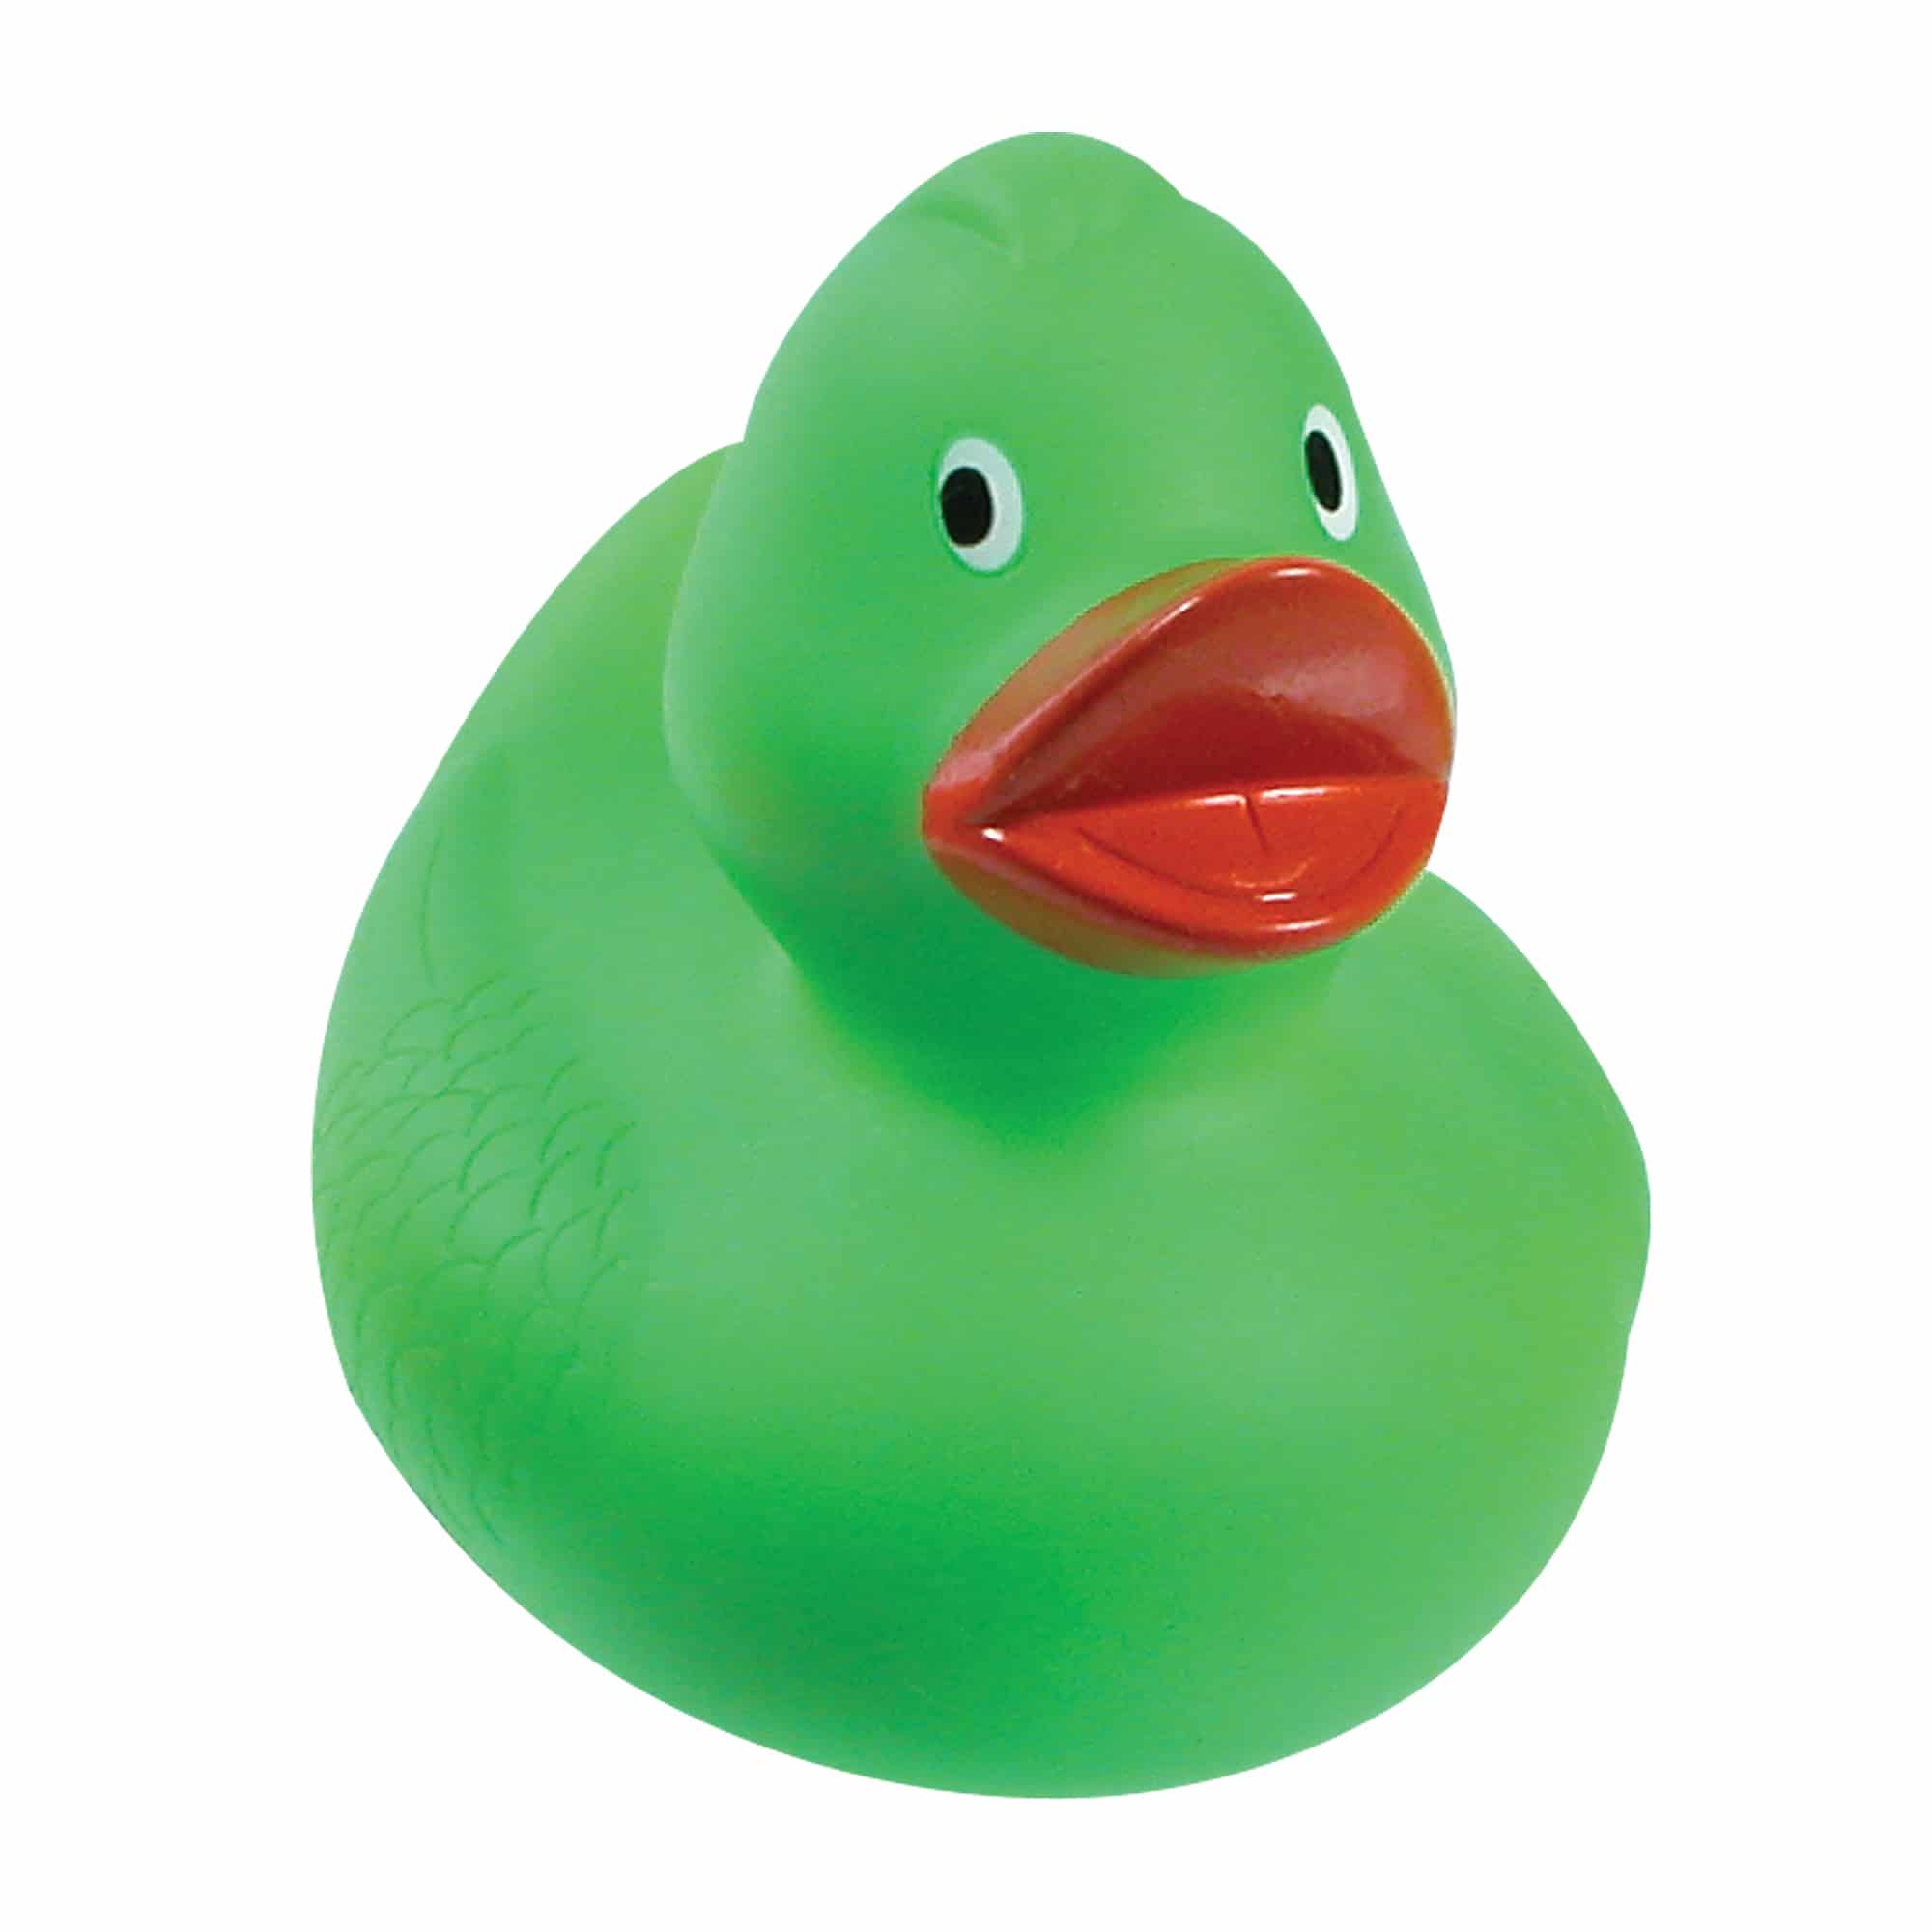 Rubber Duckies Multi Colors Schylling 8938